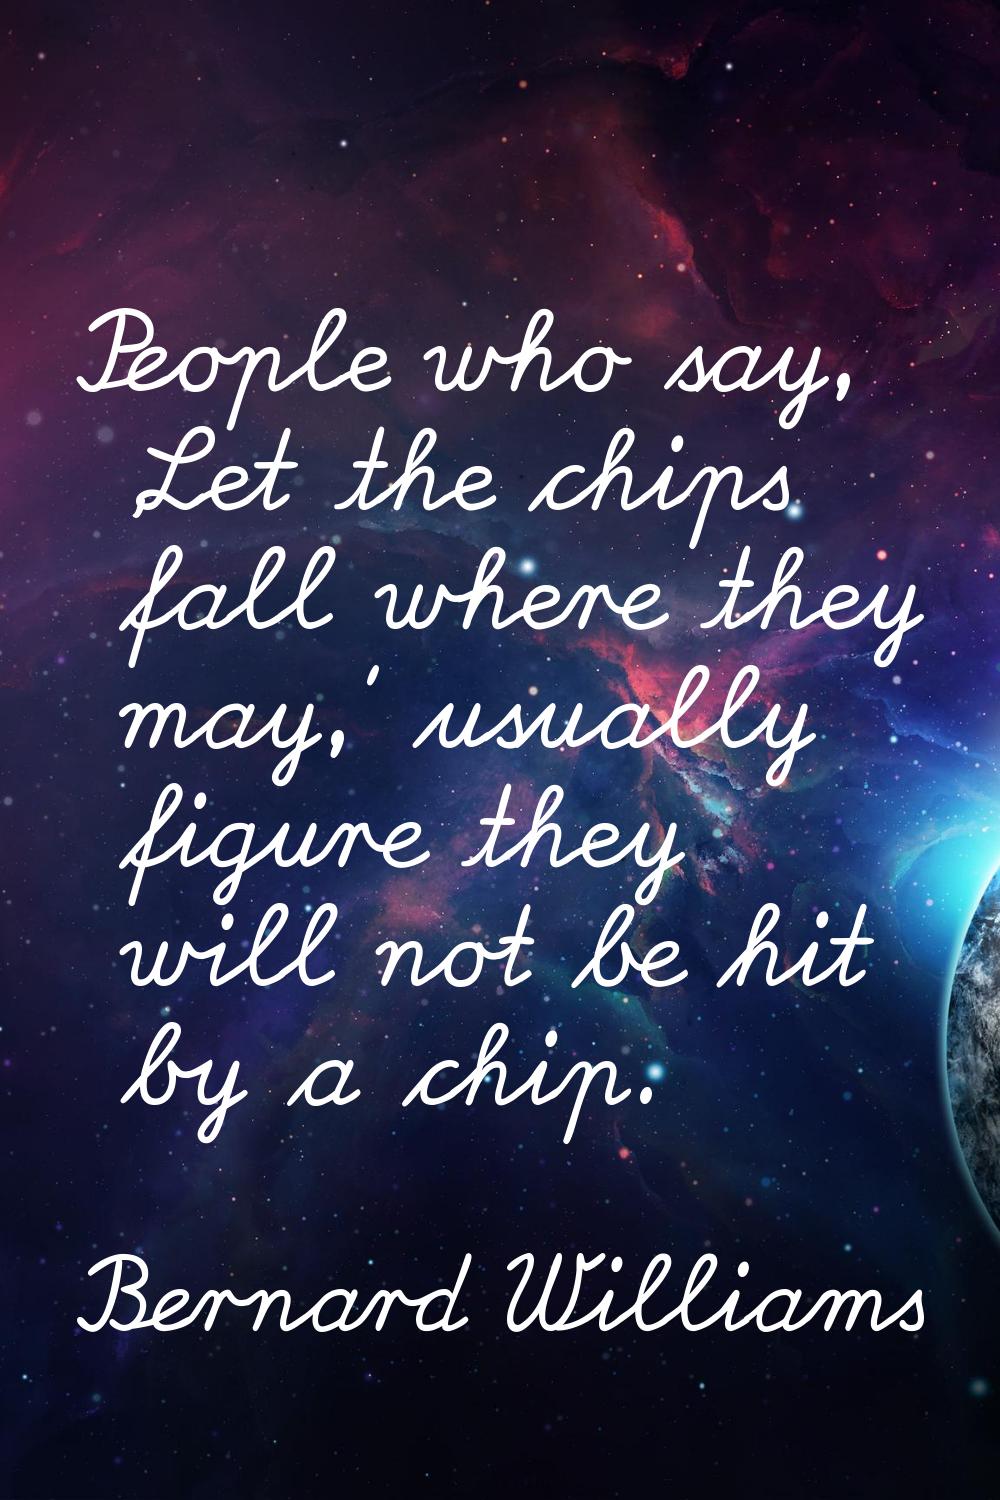 People who say, 'Let the chips fall where they may,' usually figure they will not be hit by a chip.